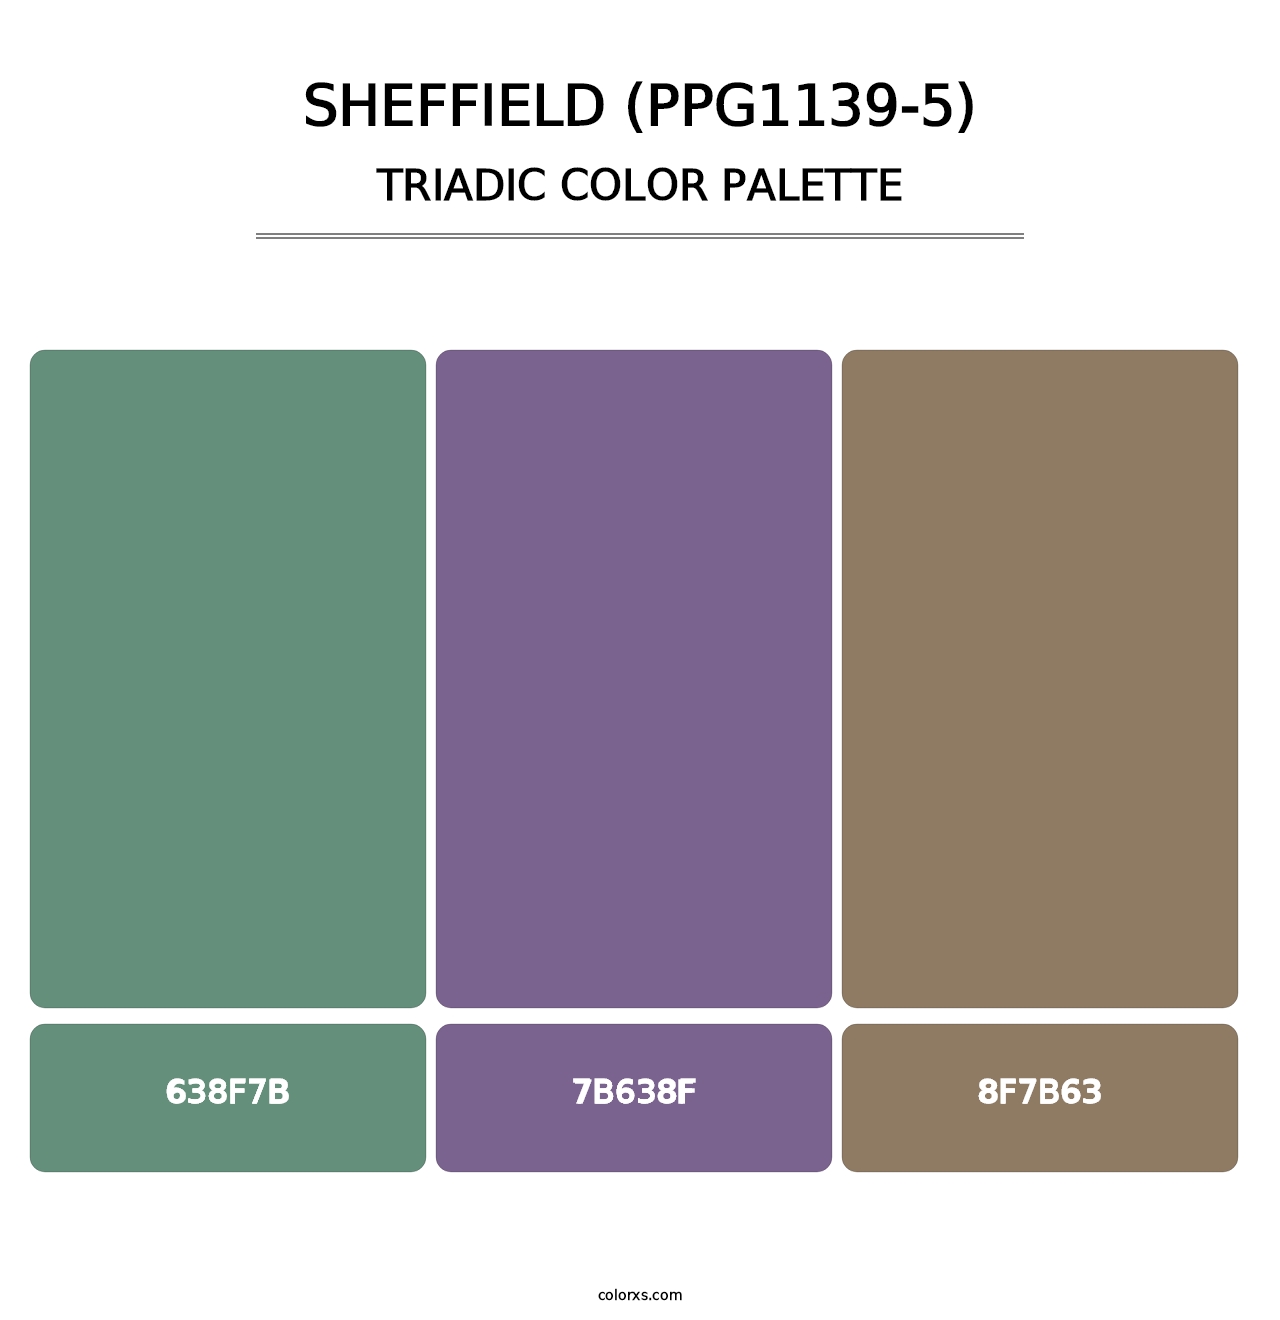 Sheffield (PPG1139-5) - Triadic Color Palette